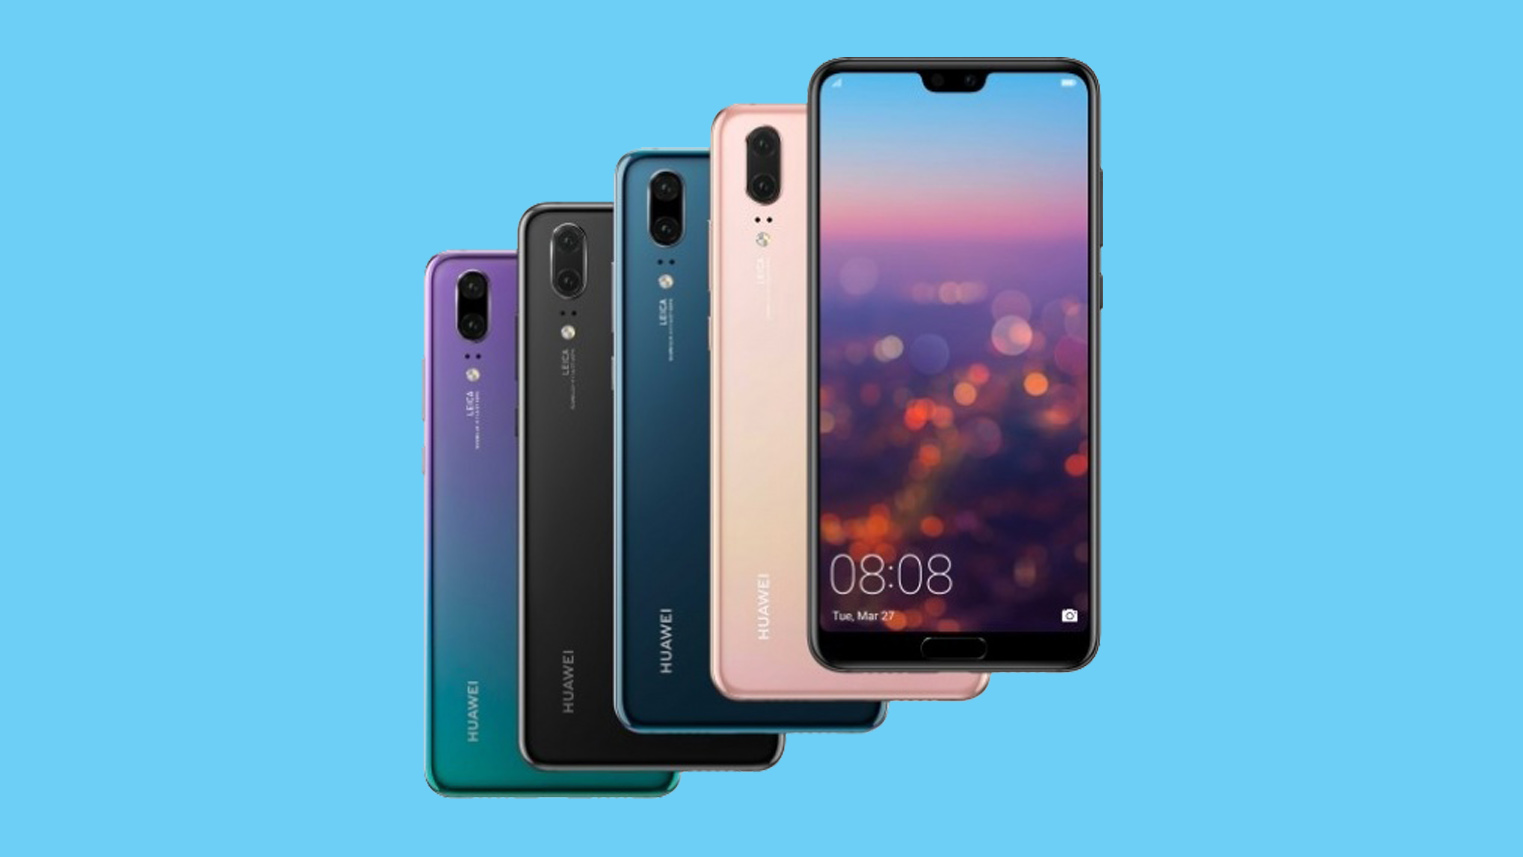 Huawei P20 officially launched in Nepal